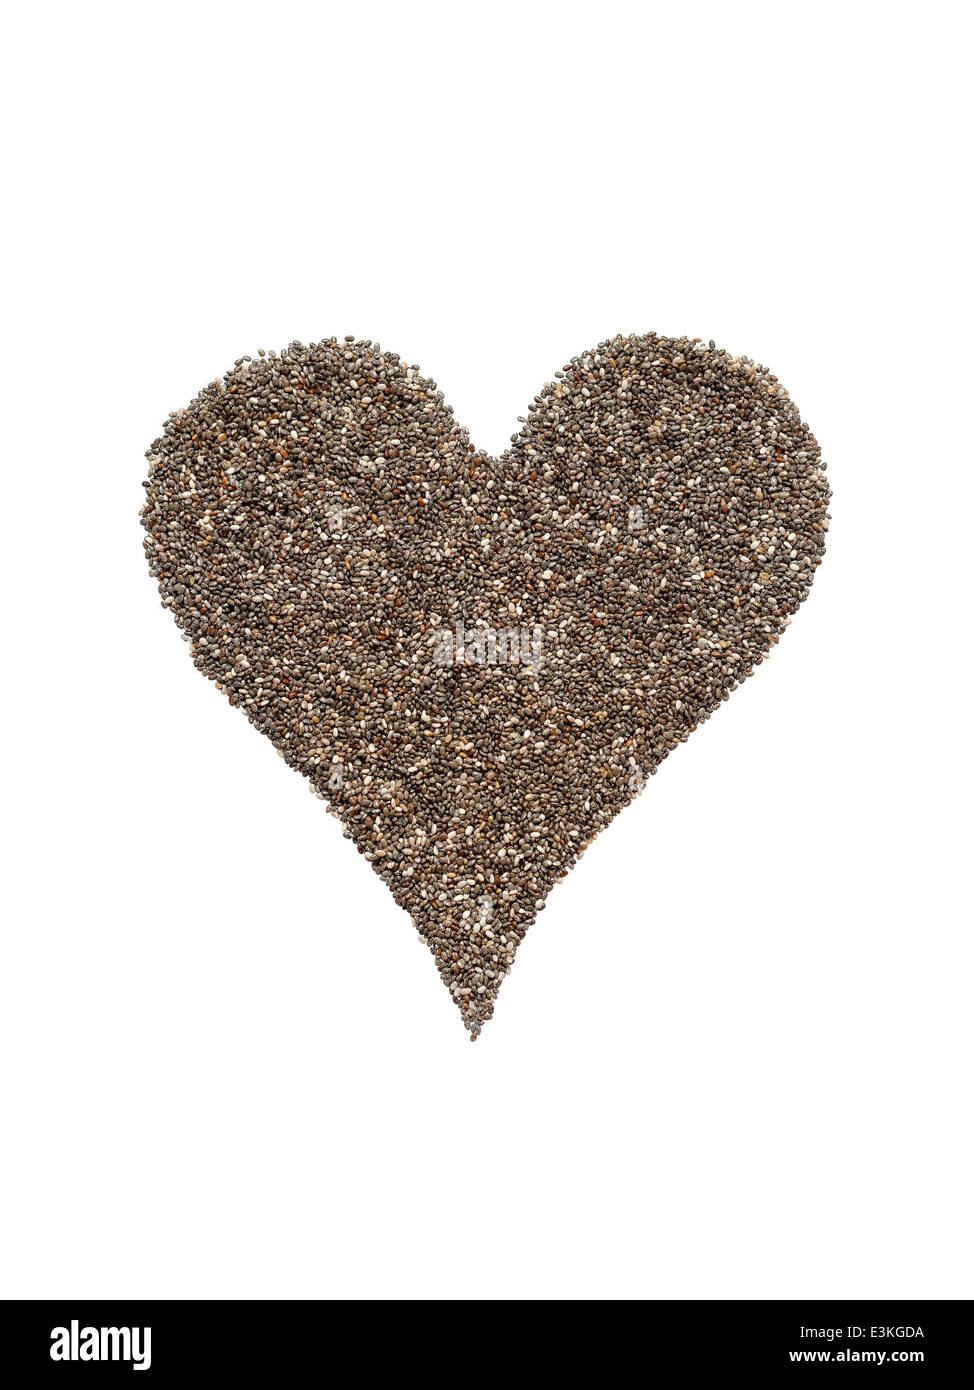 Chia seeds in heart shape symbol Stock Photo